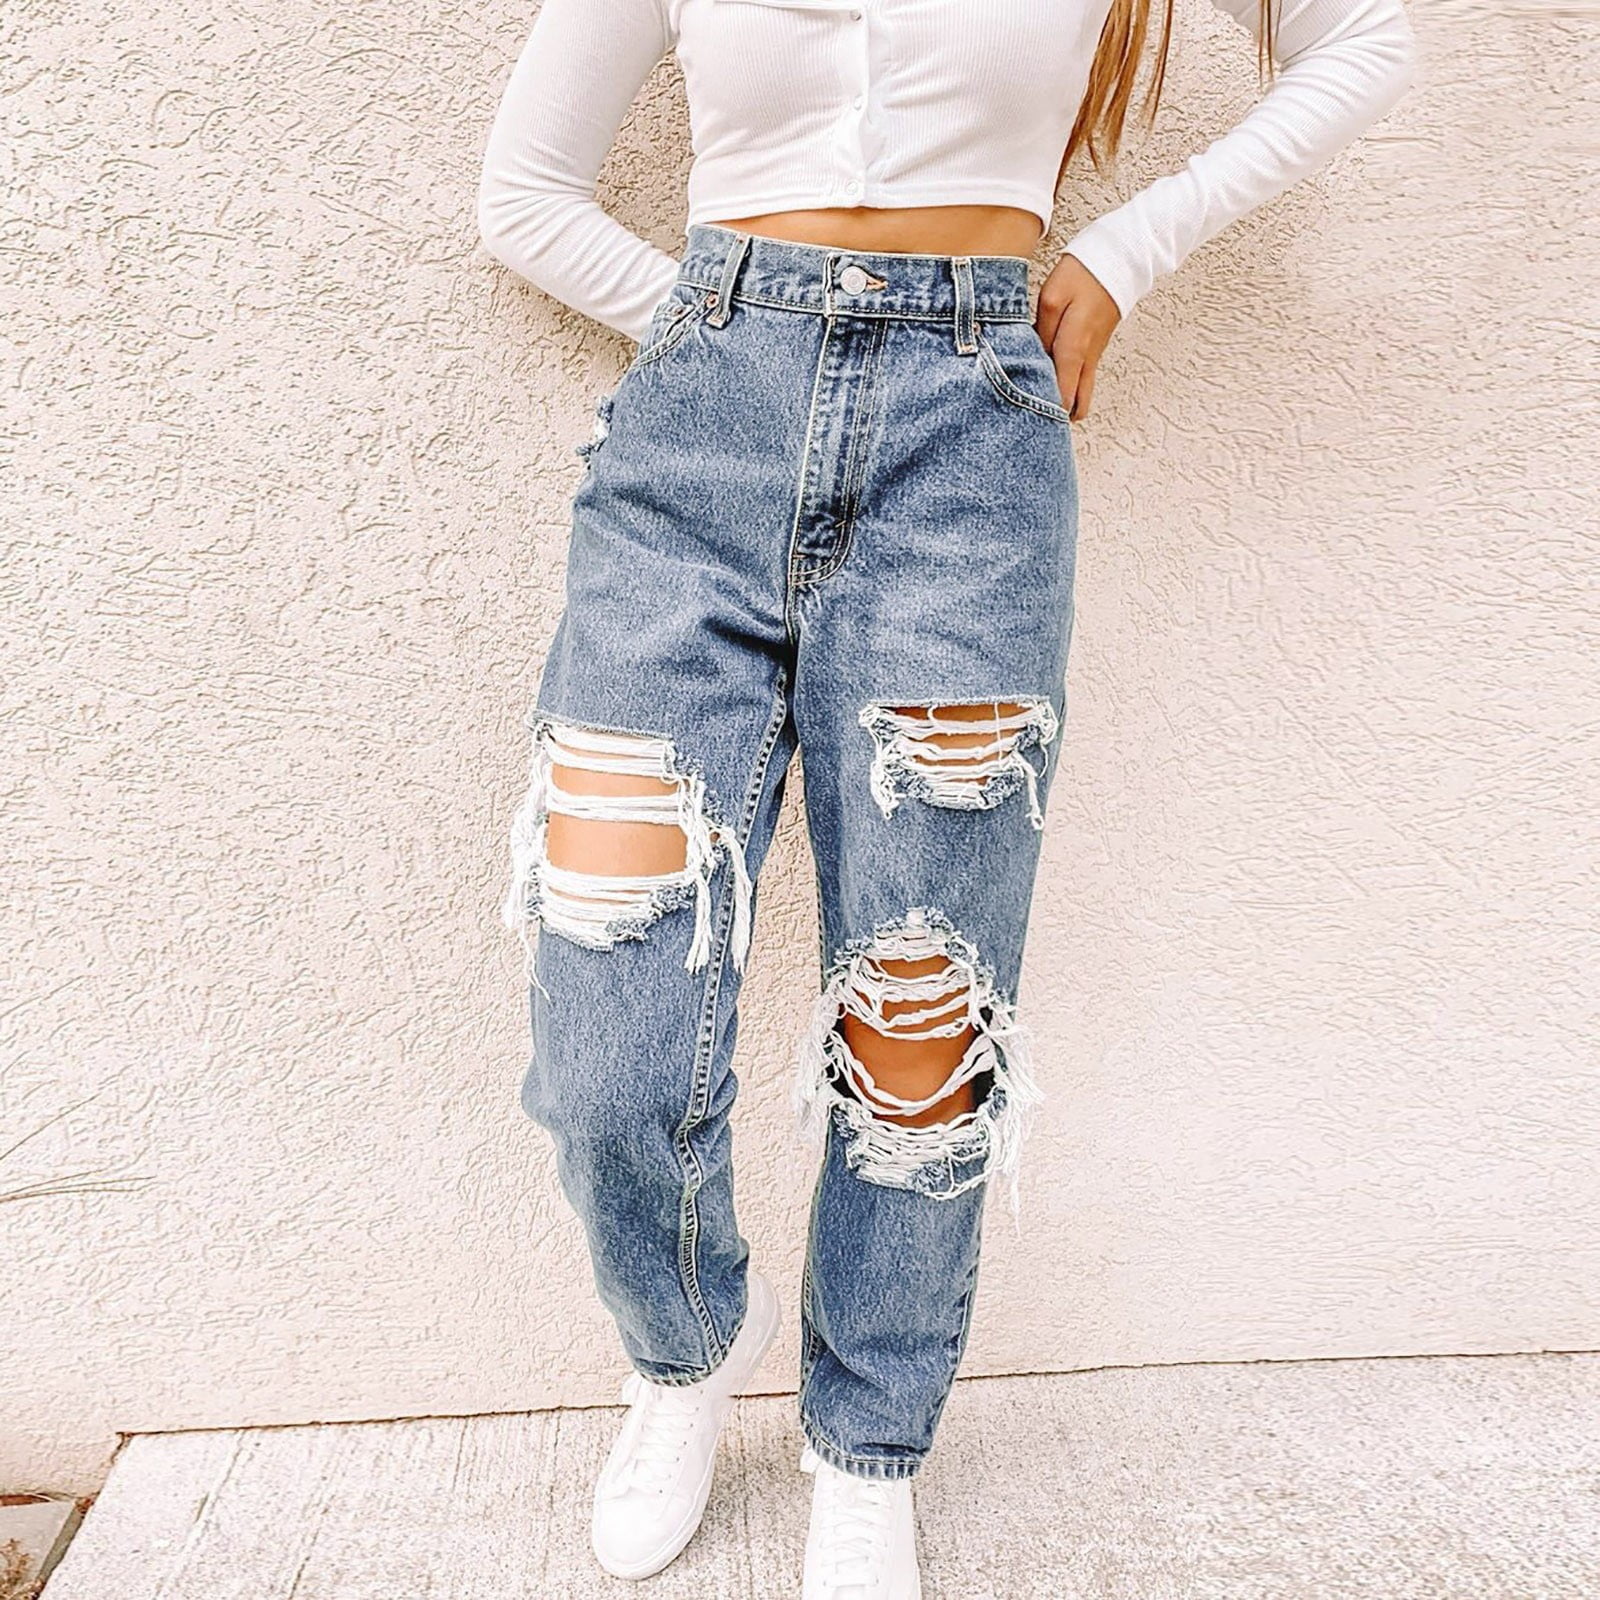 TWIFER Plus Size Pants For Women High Waisted Baggy Ripped Jeans Fashion  Large Denim Pocket Elastic Jeans